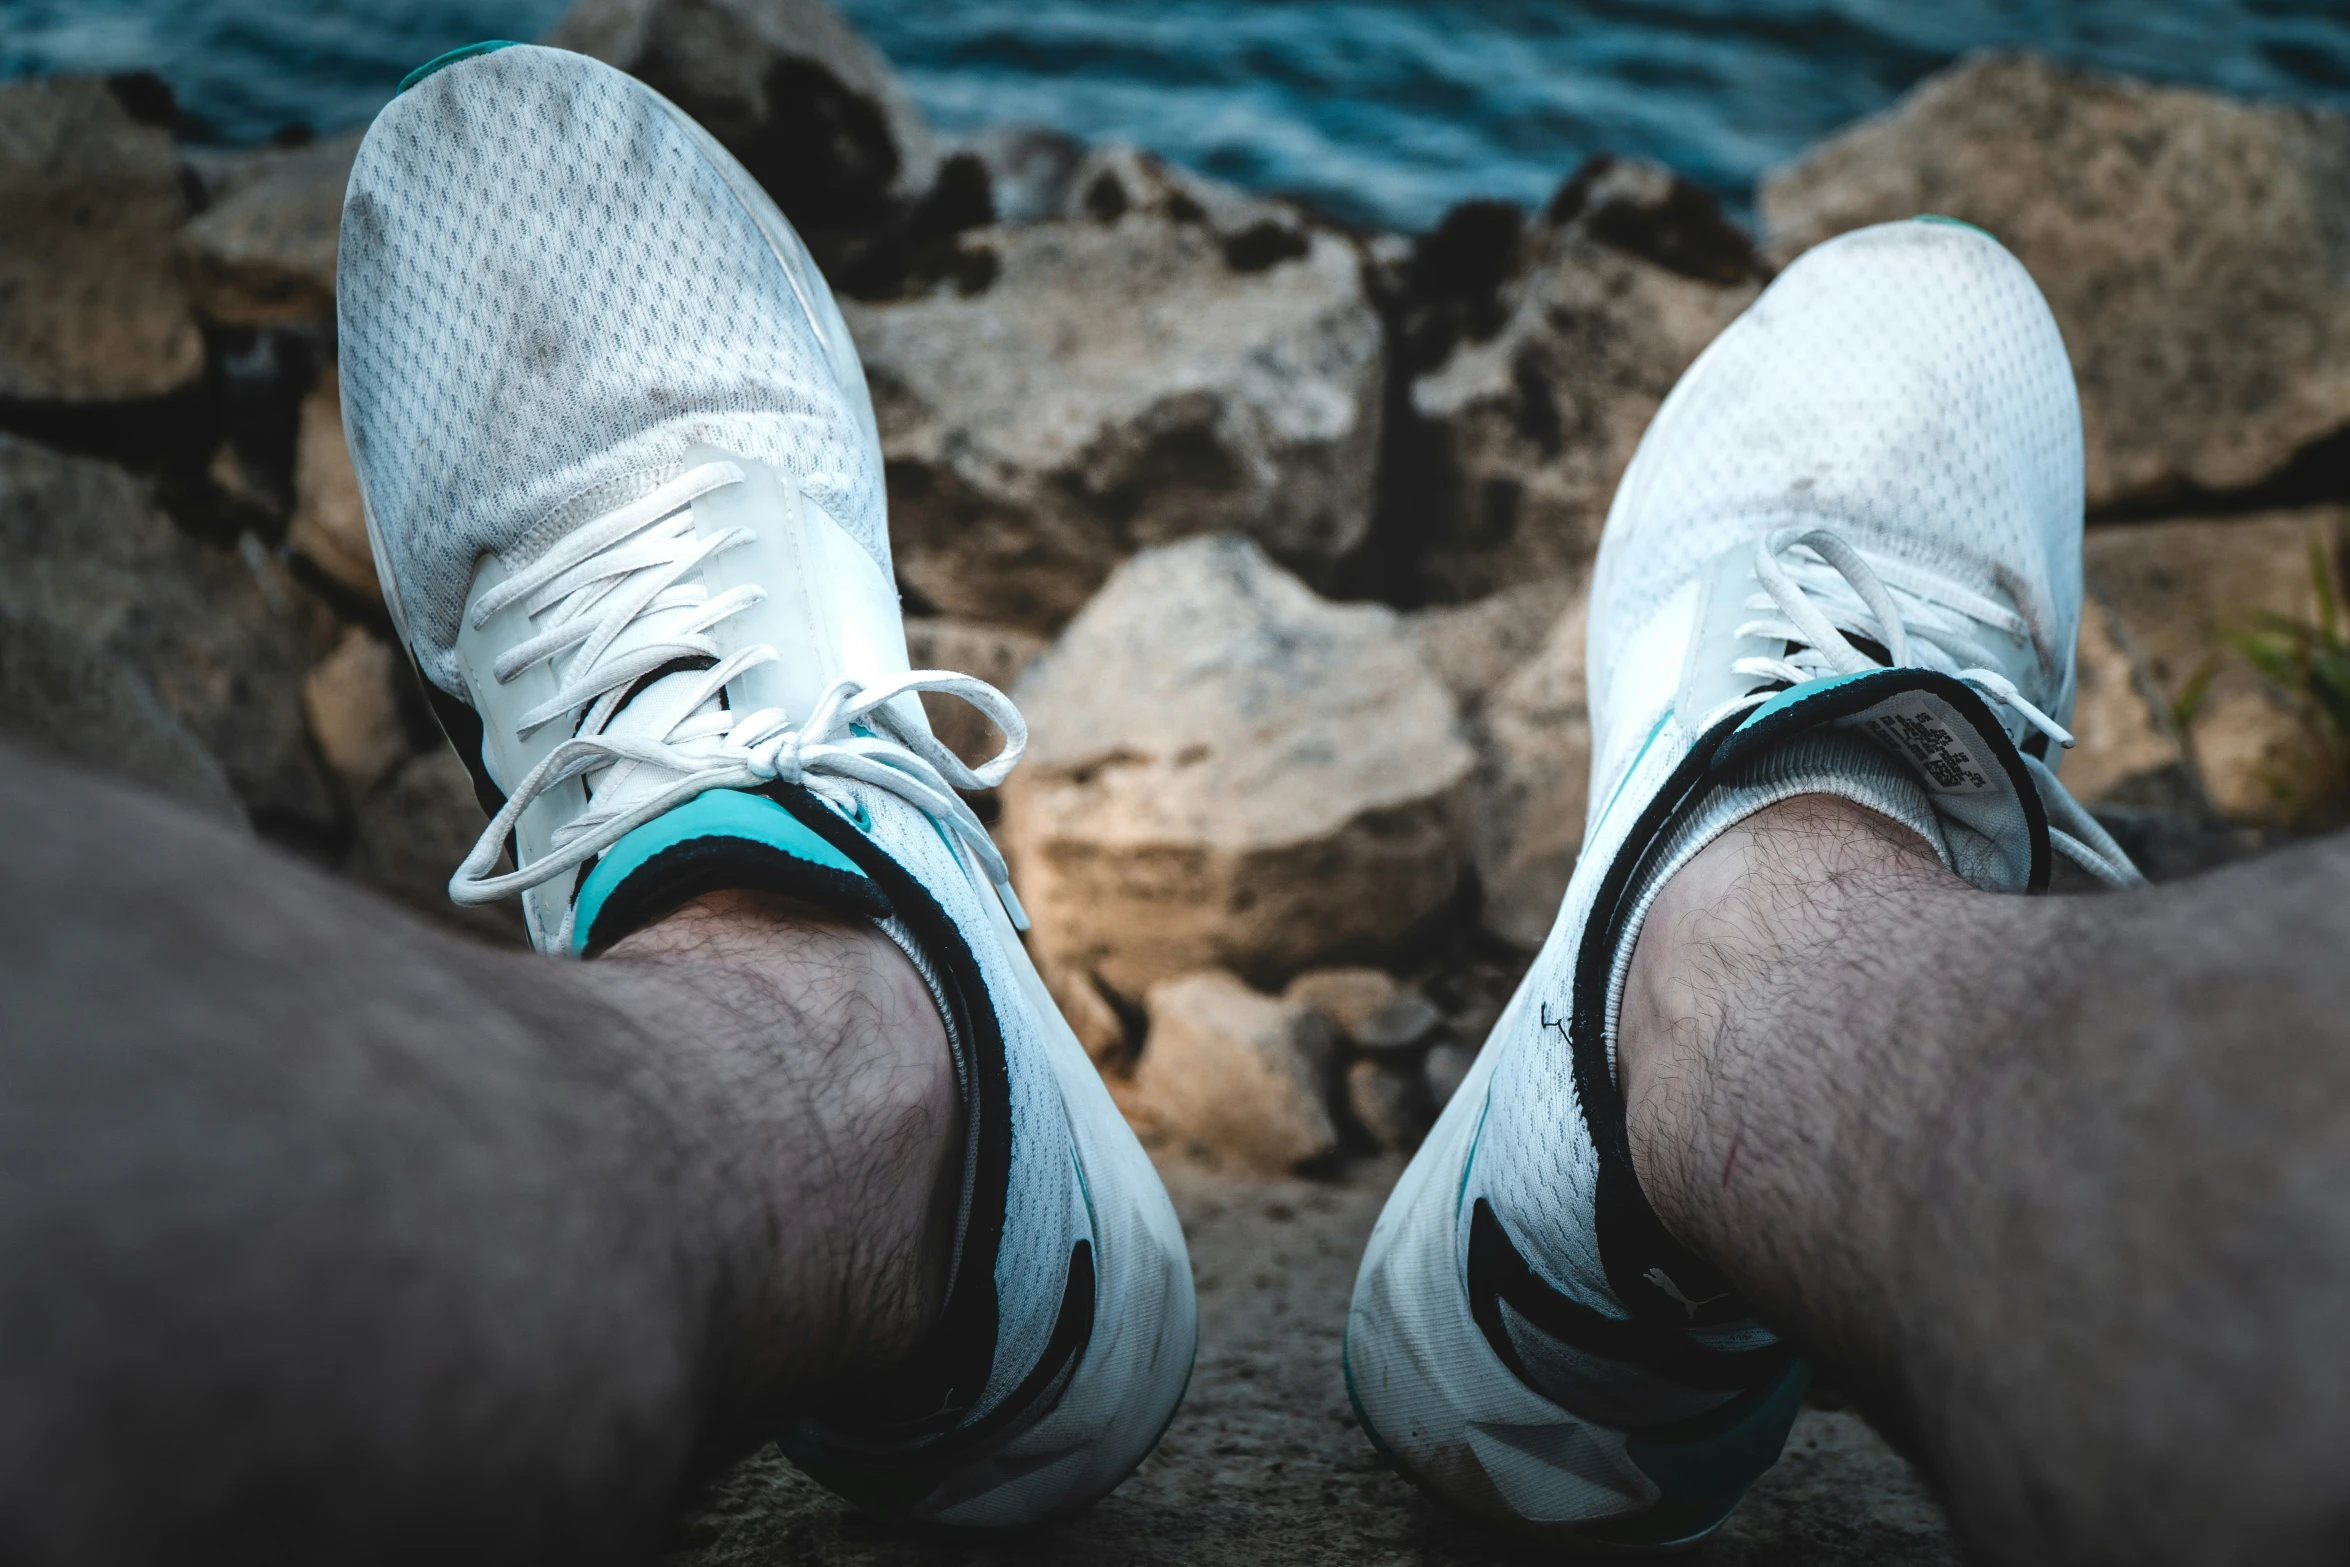 a pair of legs in sneakers with rocks in the background